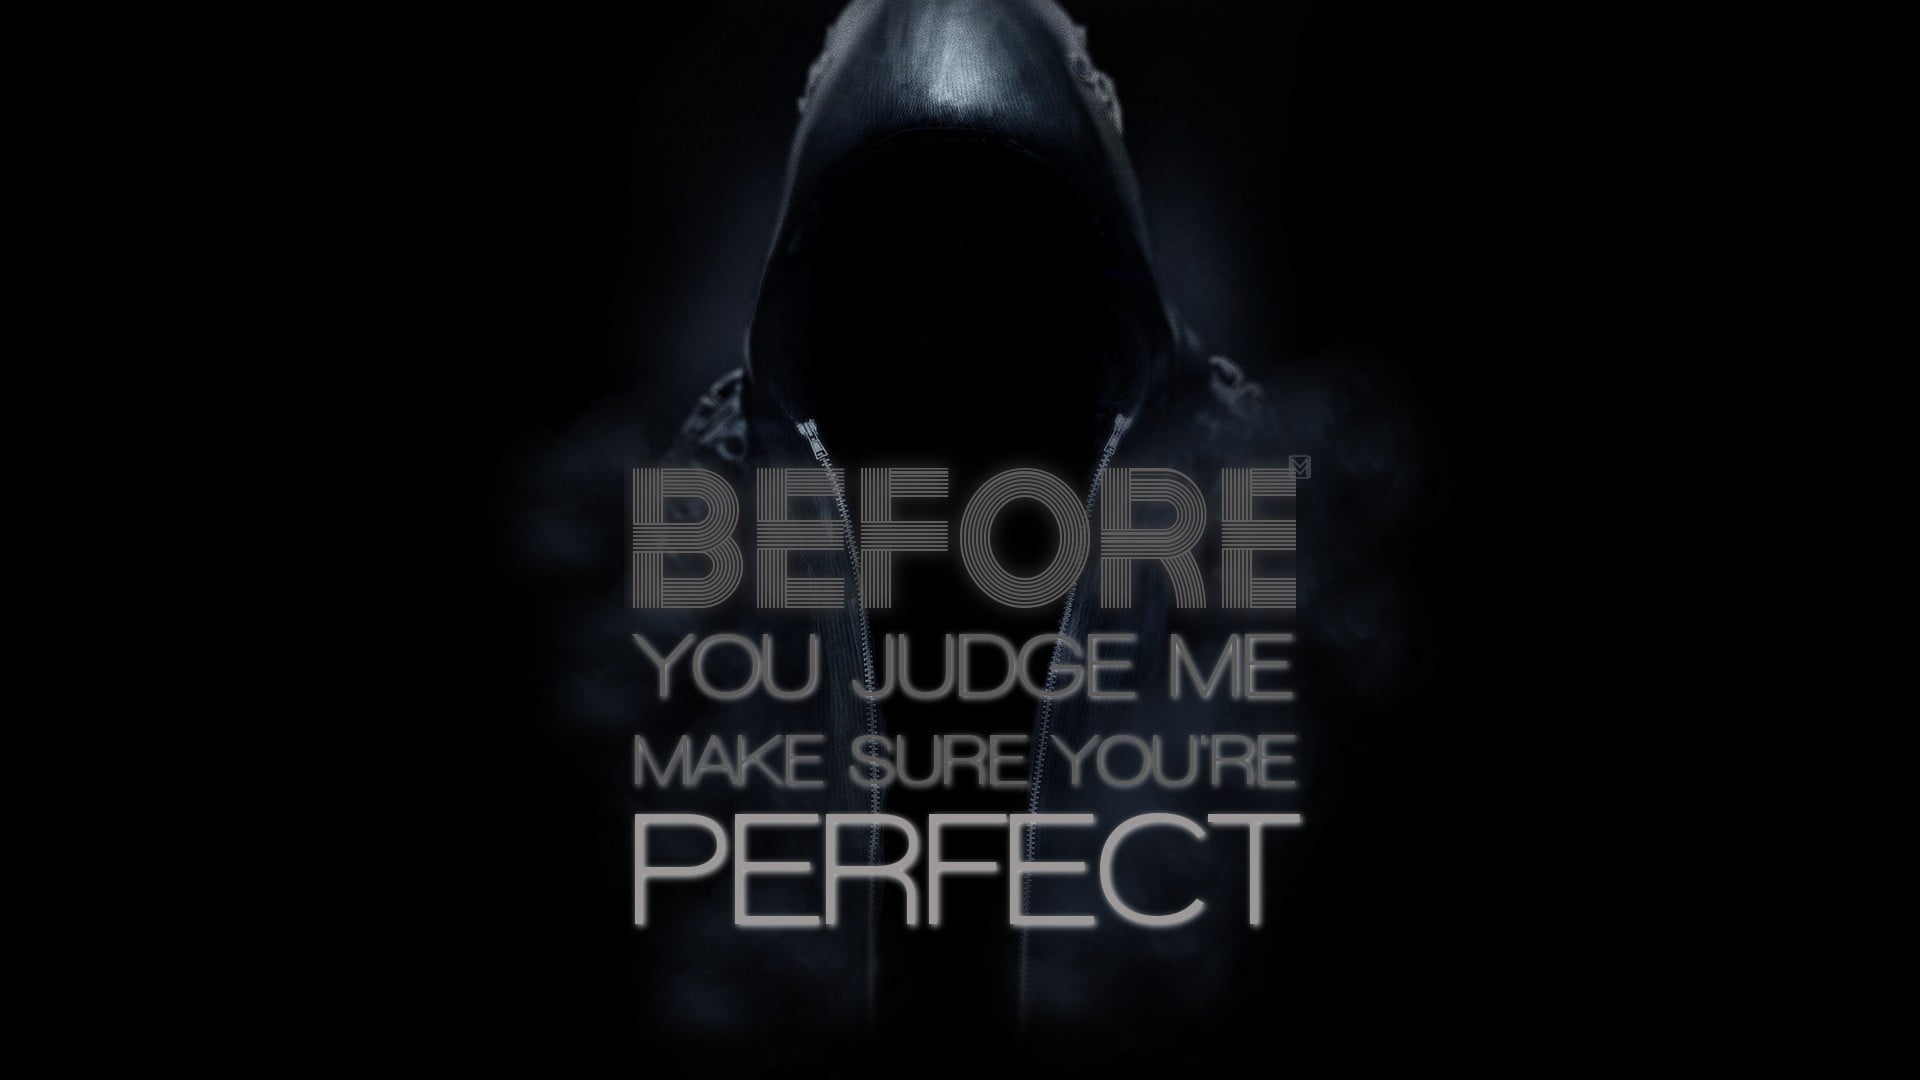 Before you judge me make sure you're perfect wallpaper, quote